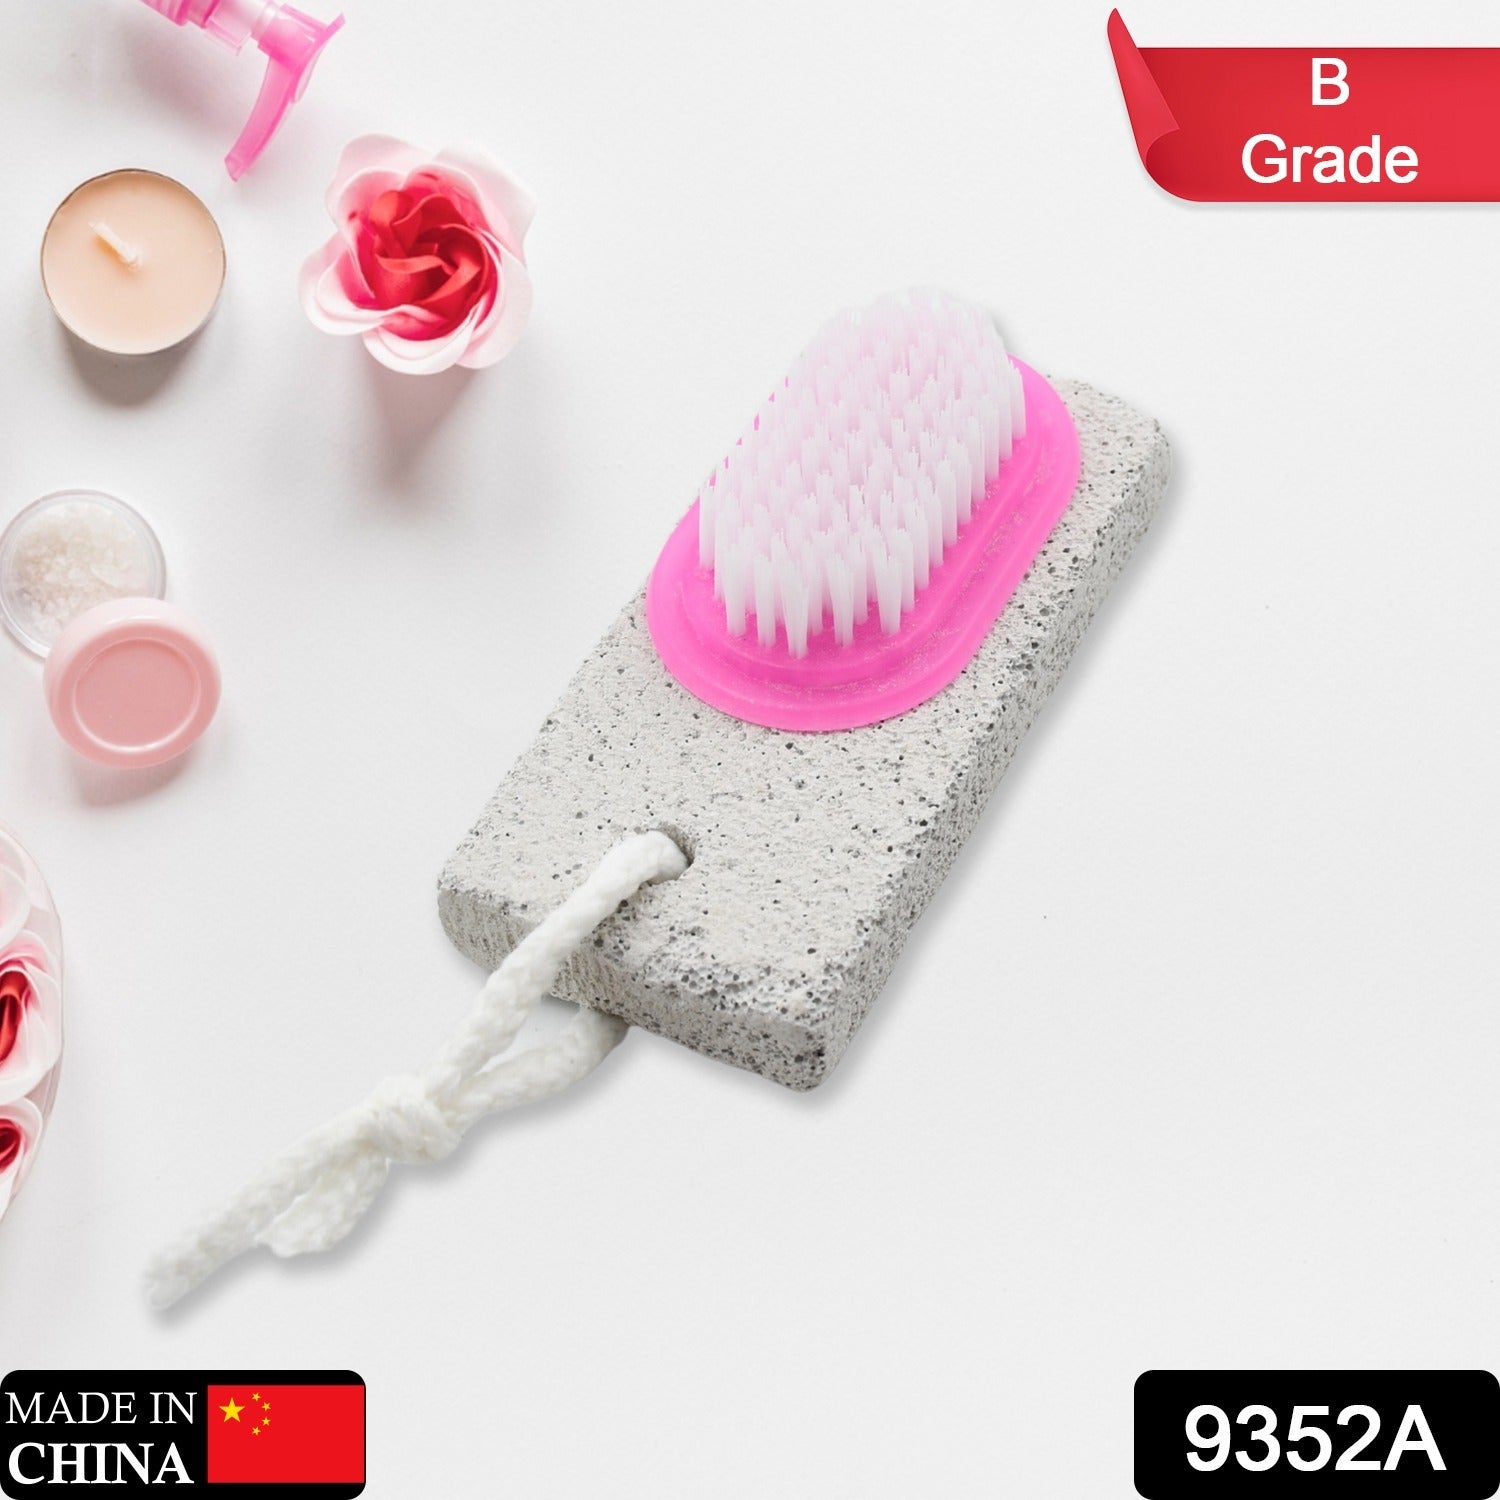 9352A Hand and Foot Brush with pumice stone to Remove Dead Skin & Callus (B Grade)